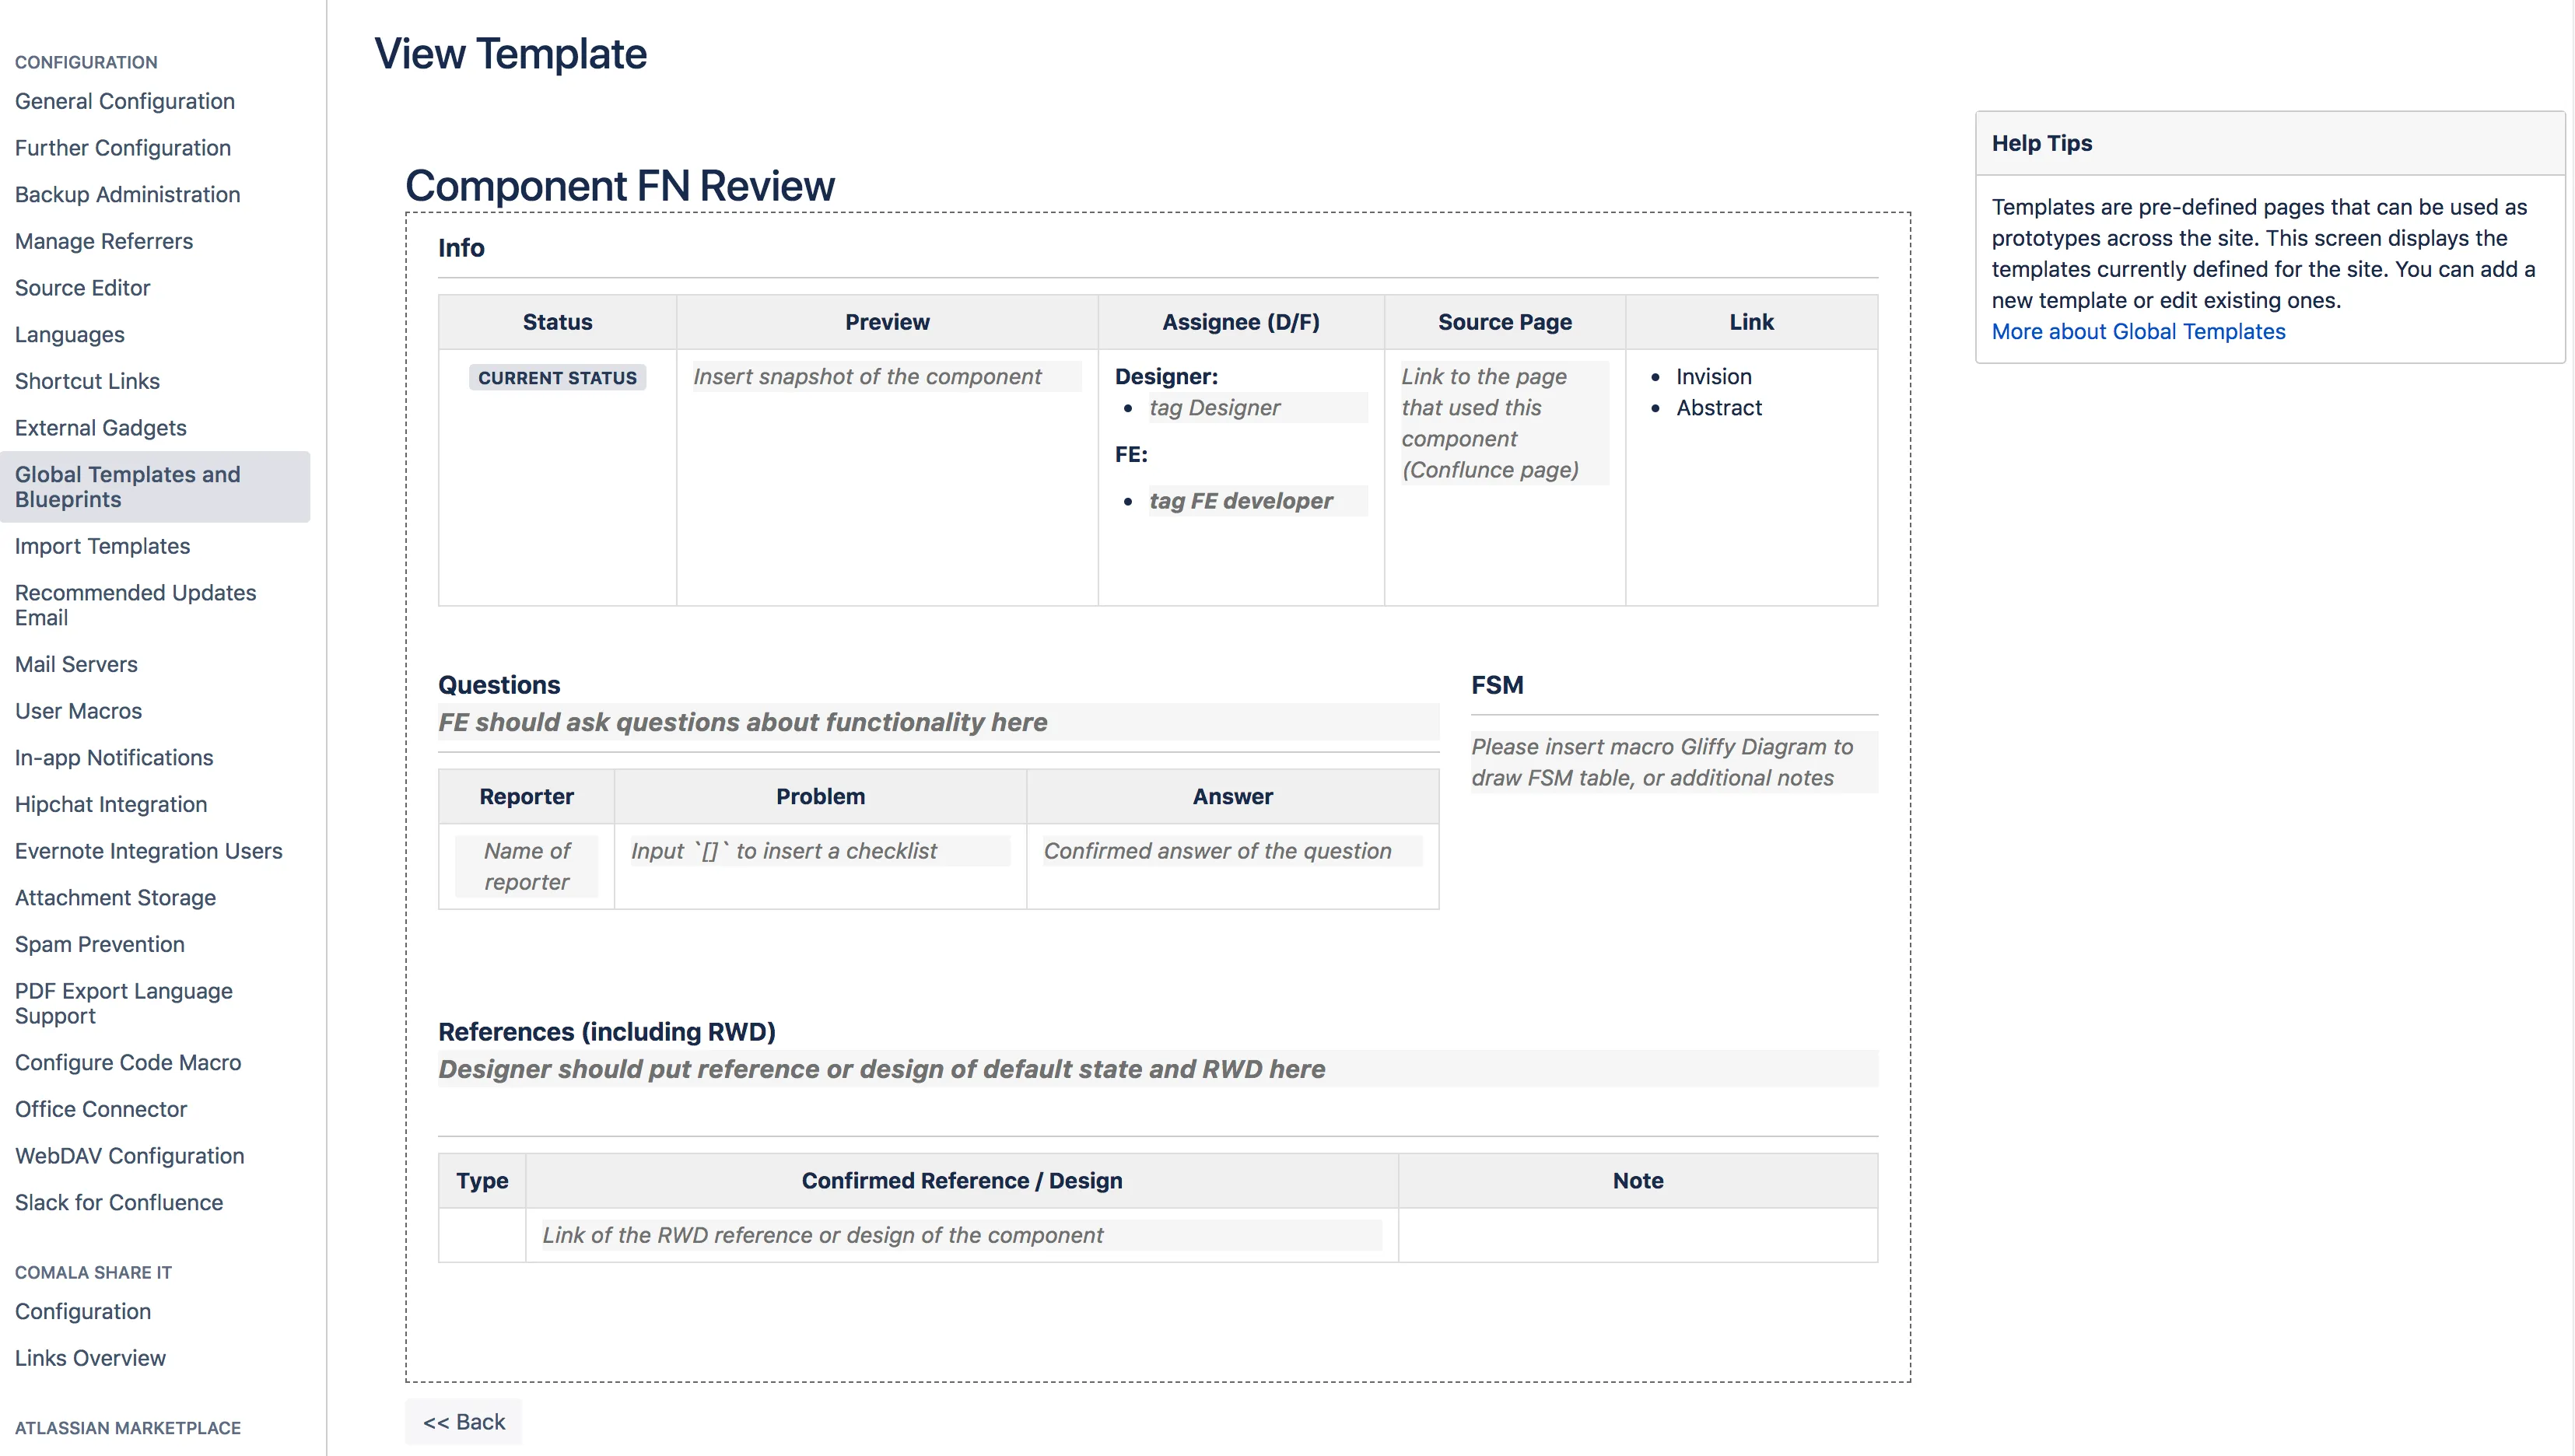 Custom template for component review in Confluence